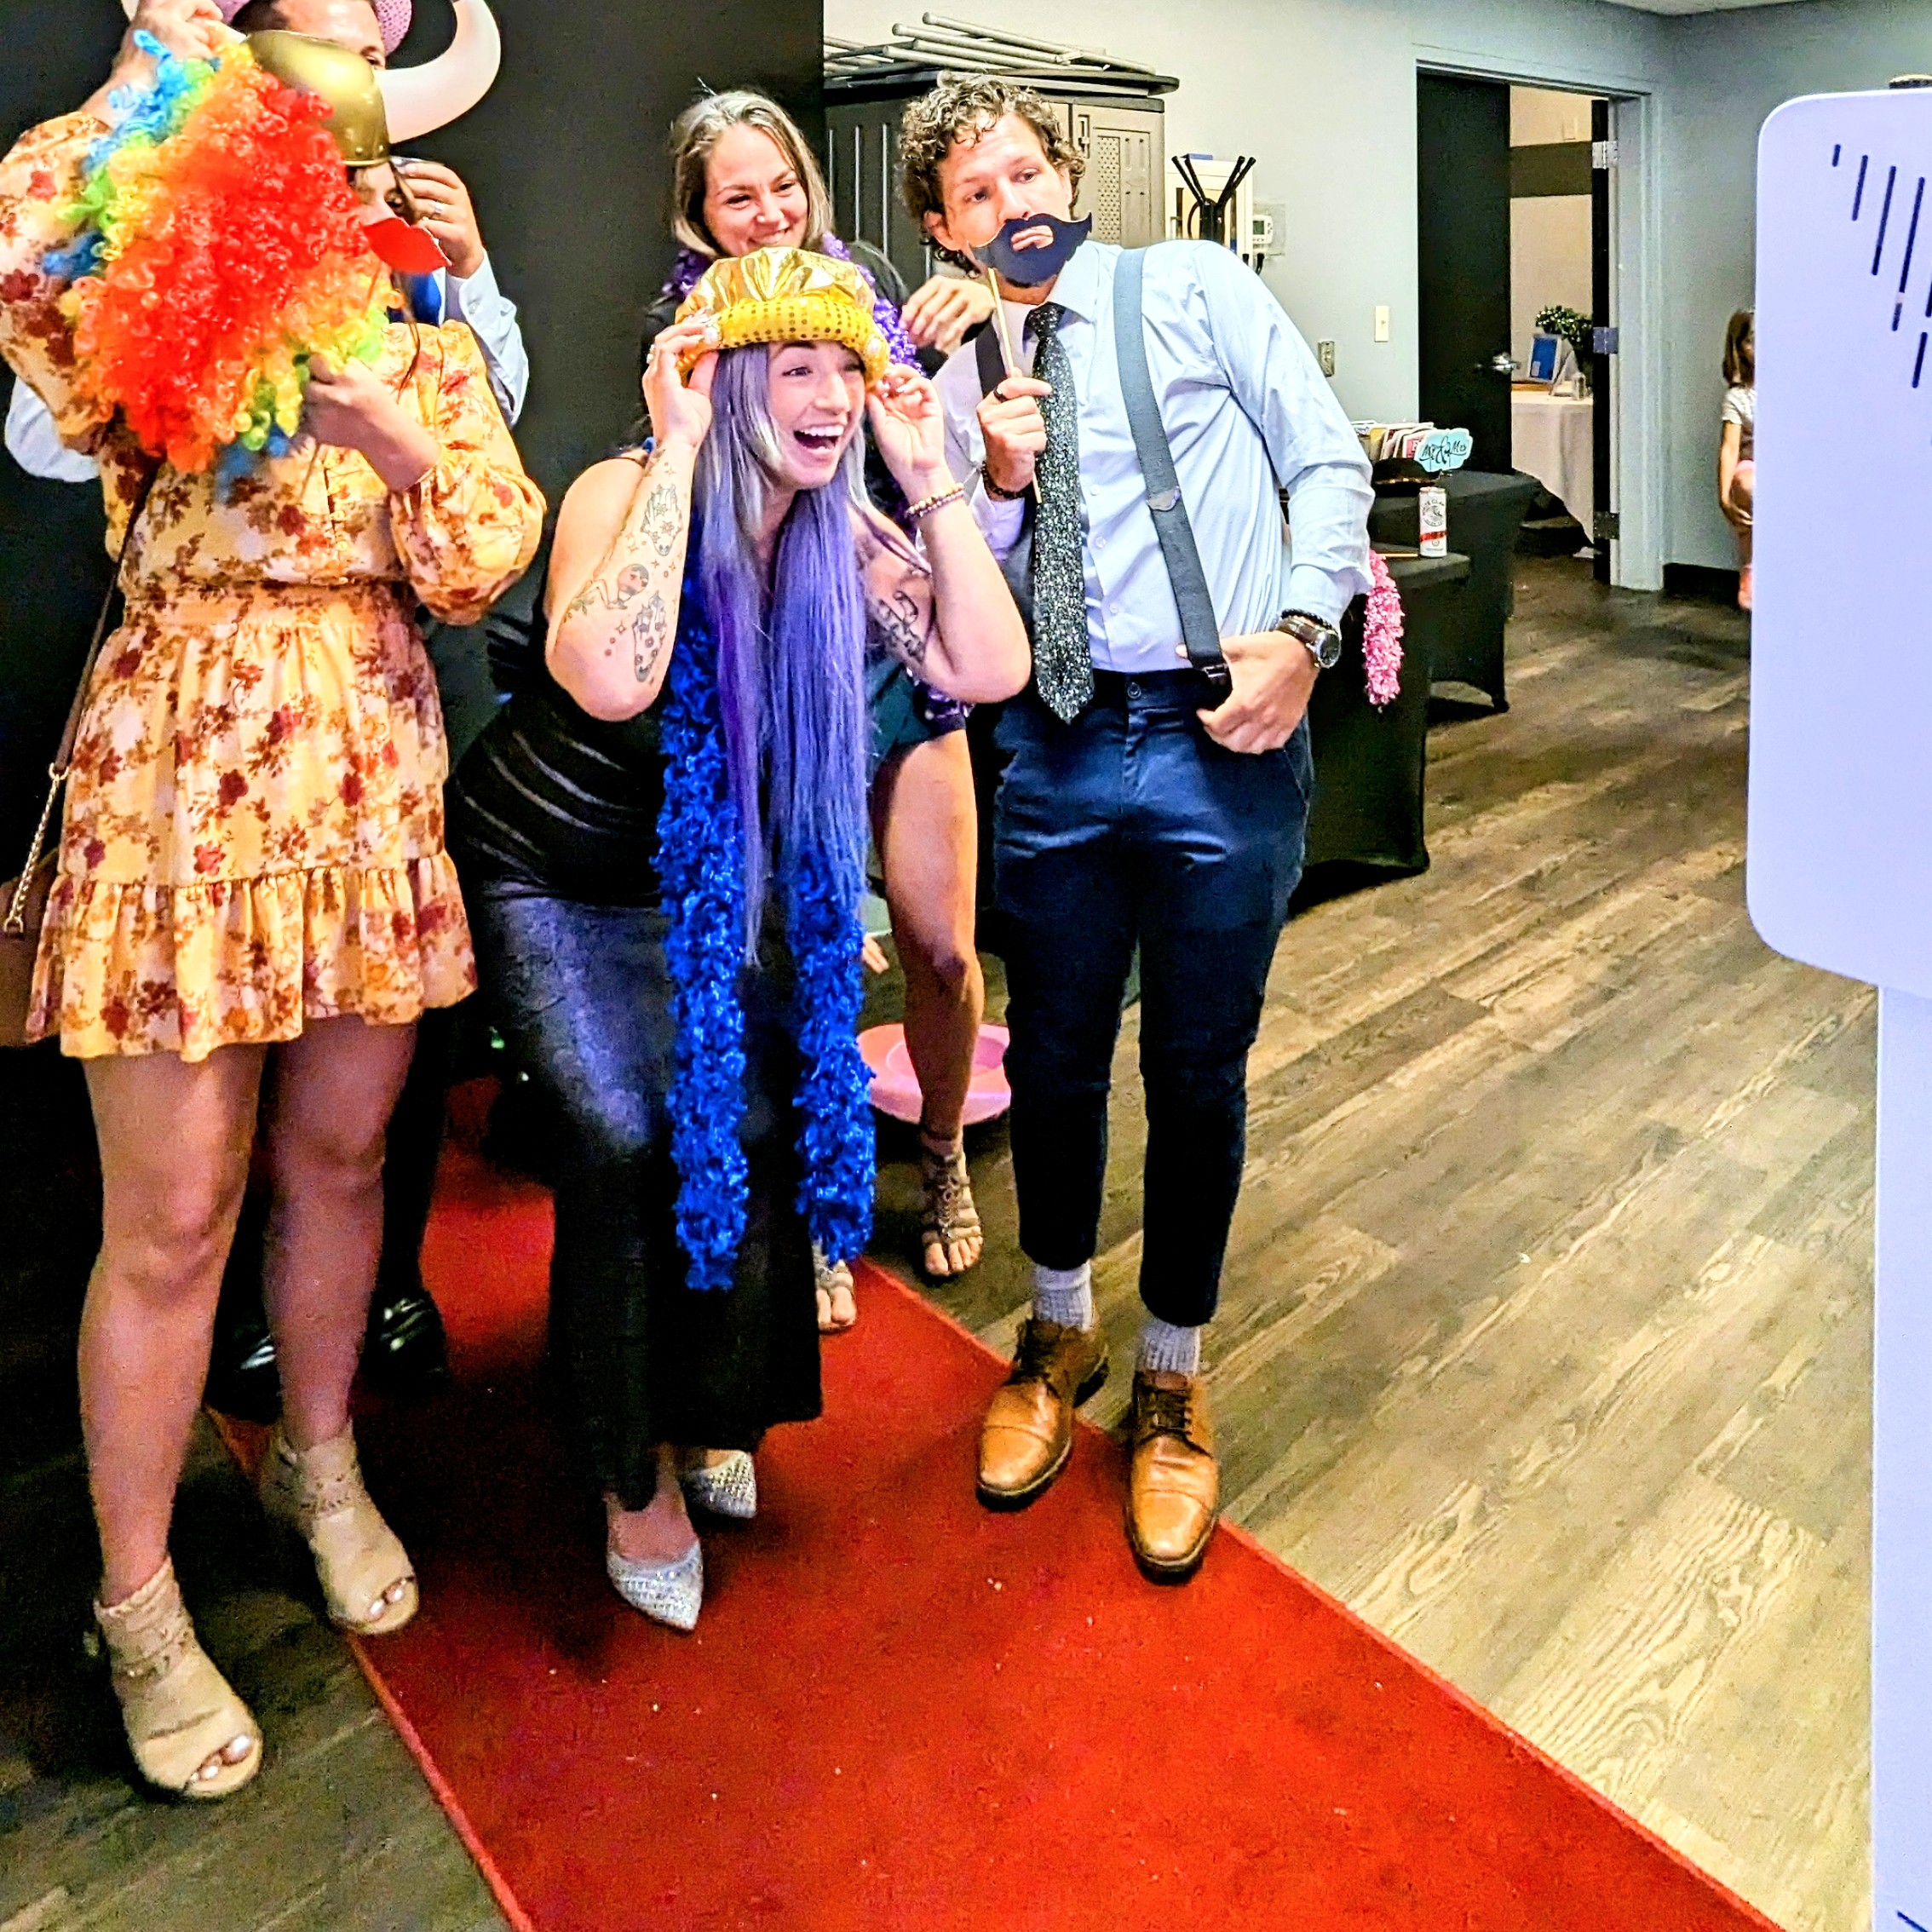 Epic photo booth fun at a lively party. Friends in colorful costumes capture the joy of celebrations